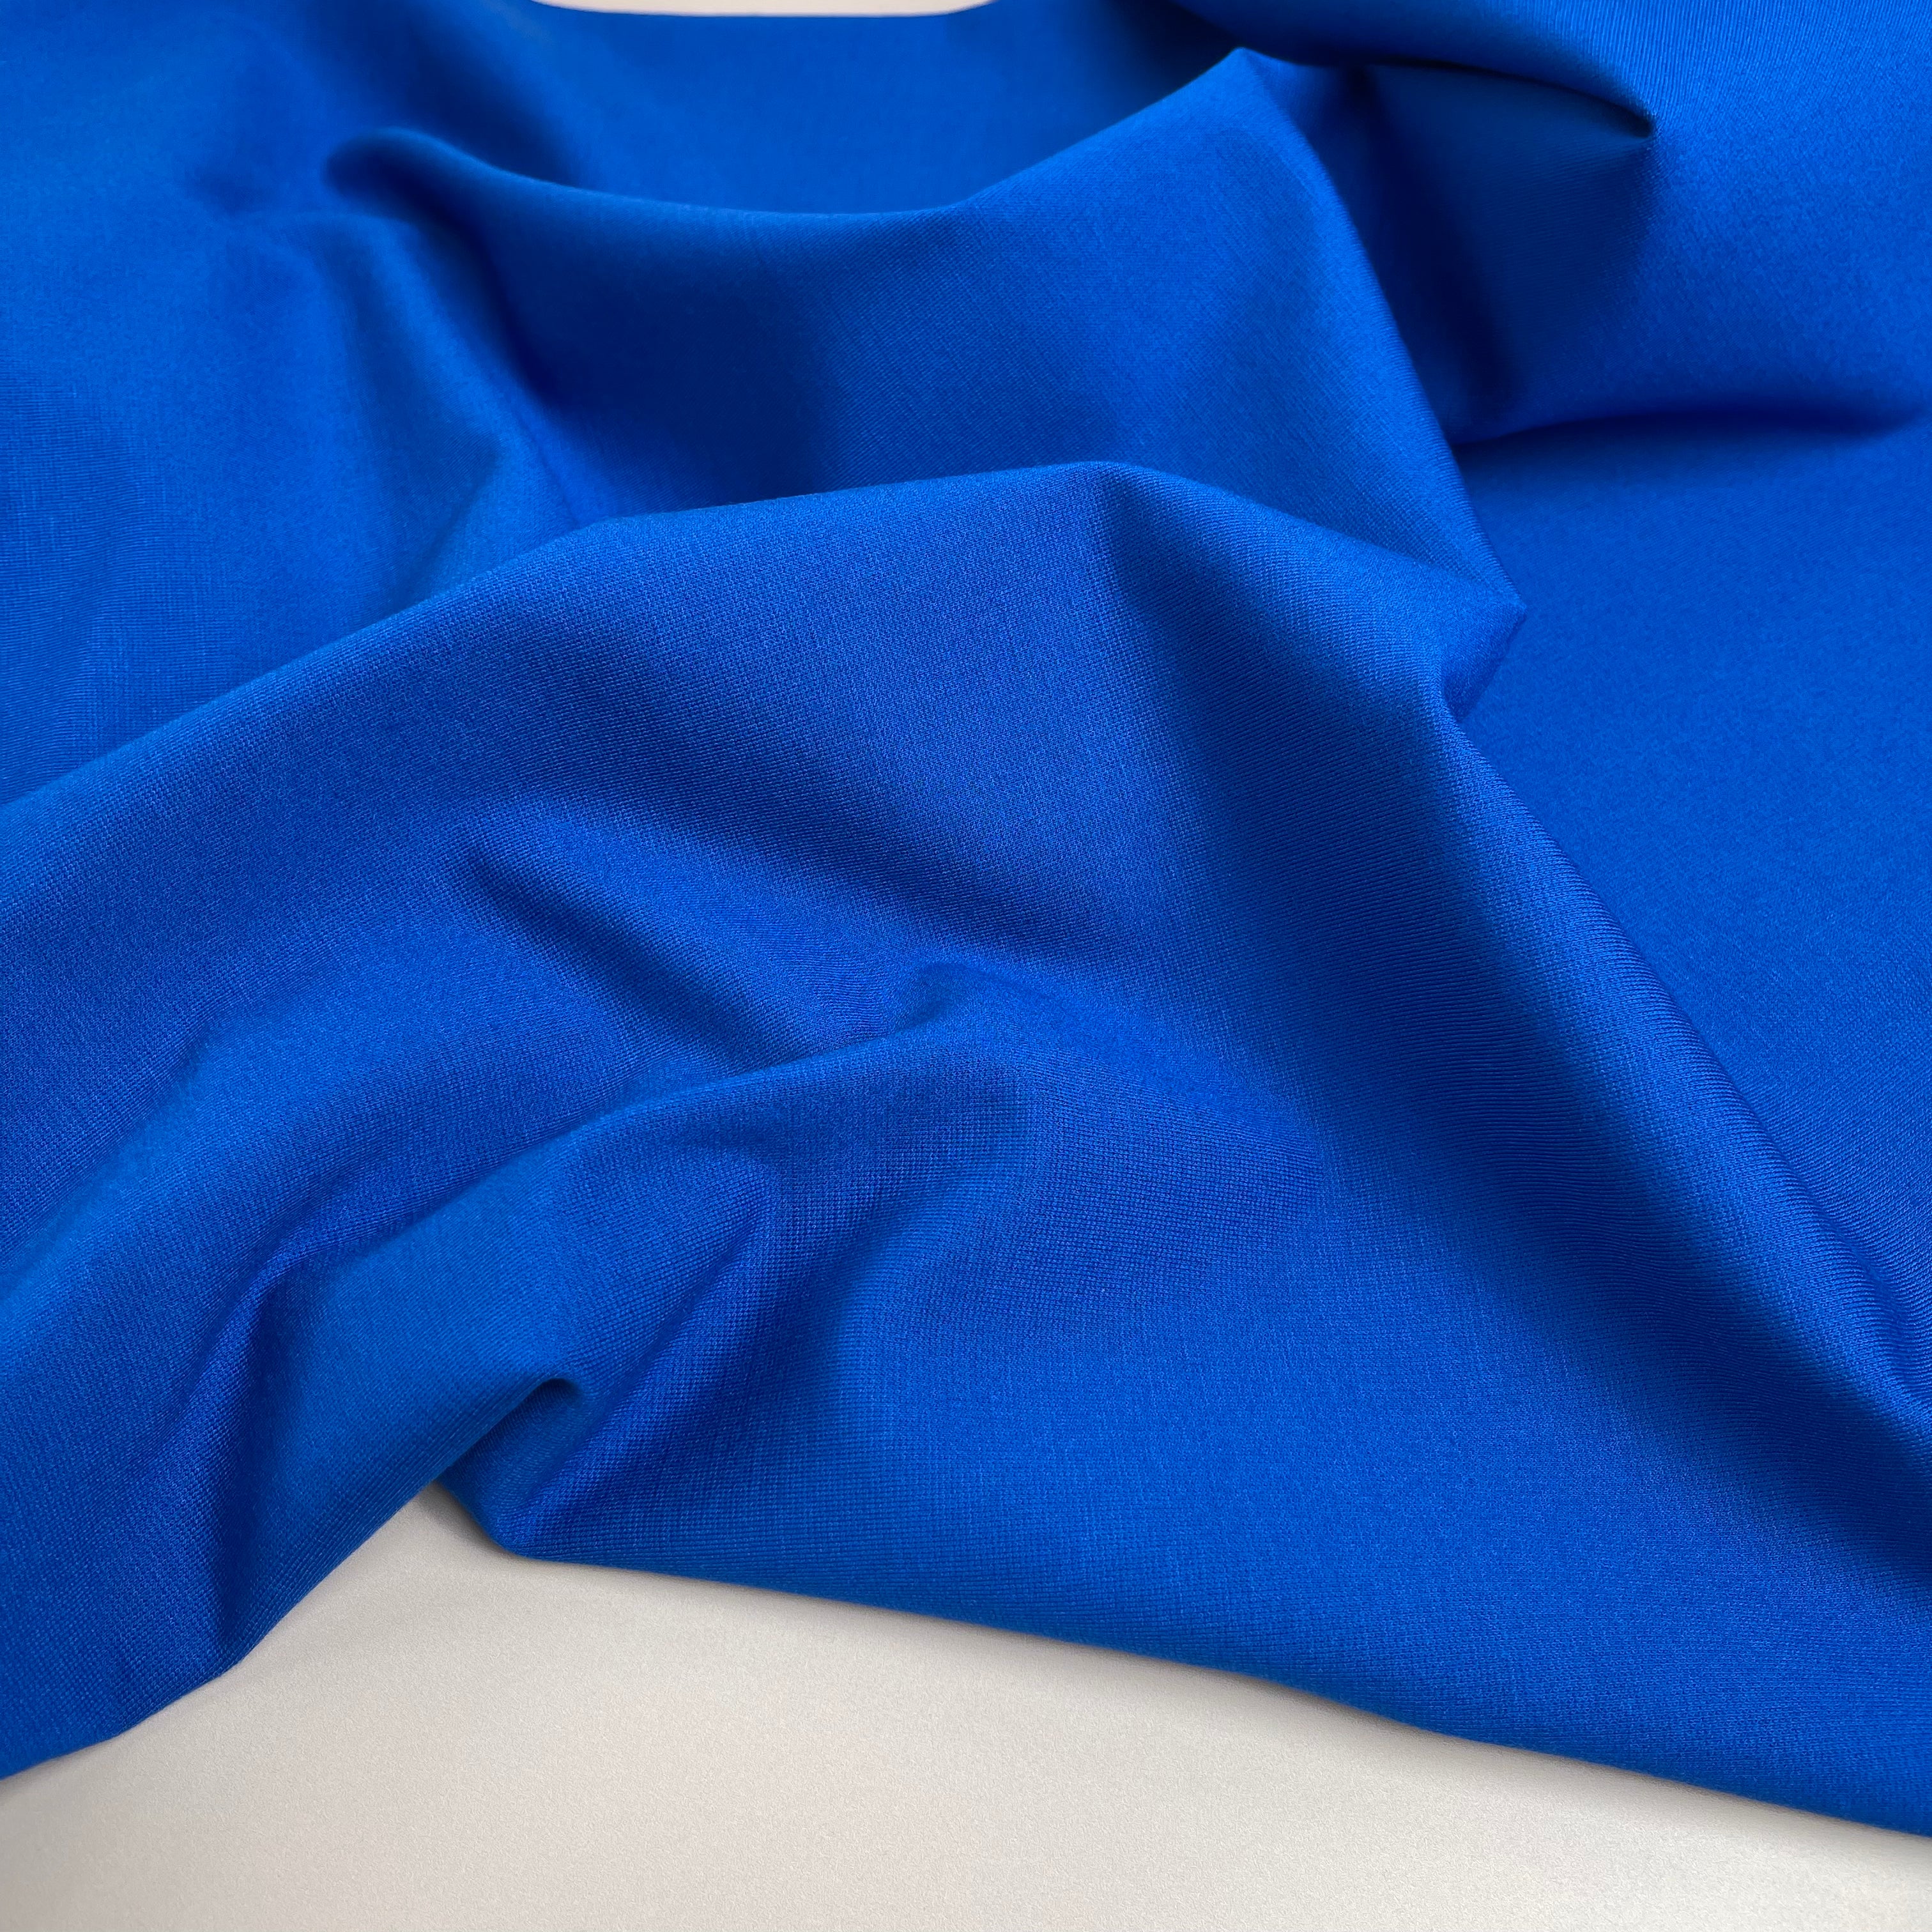 REMNANT 0.61 Metre - Royal Blue Viscose Ponte Roma Double Knit Fabric